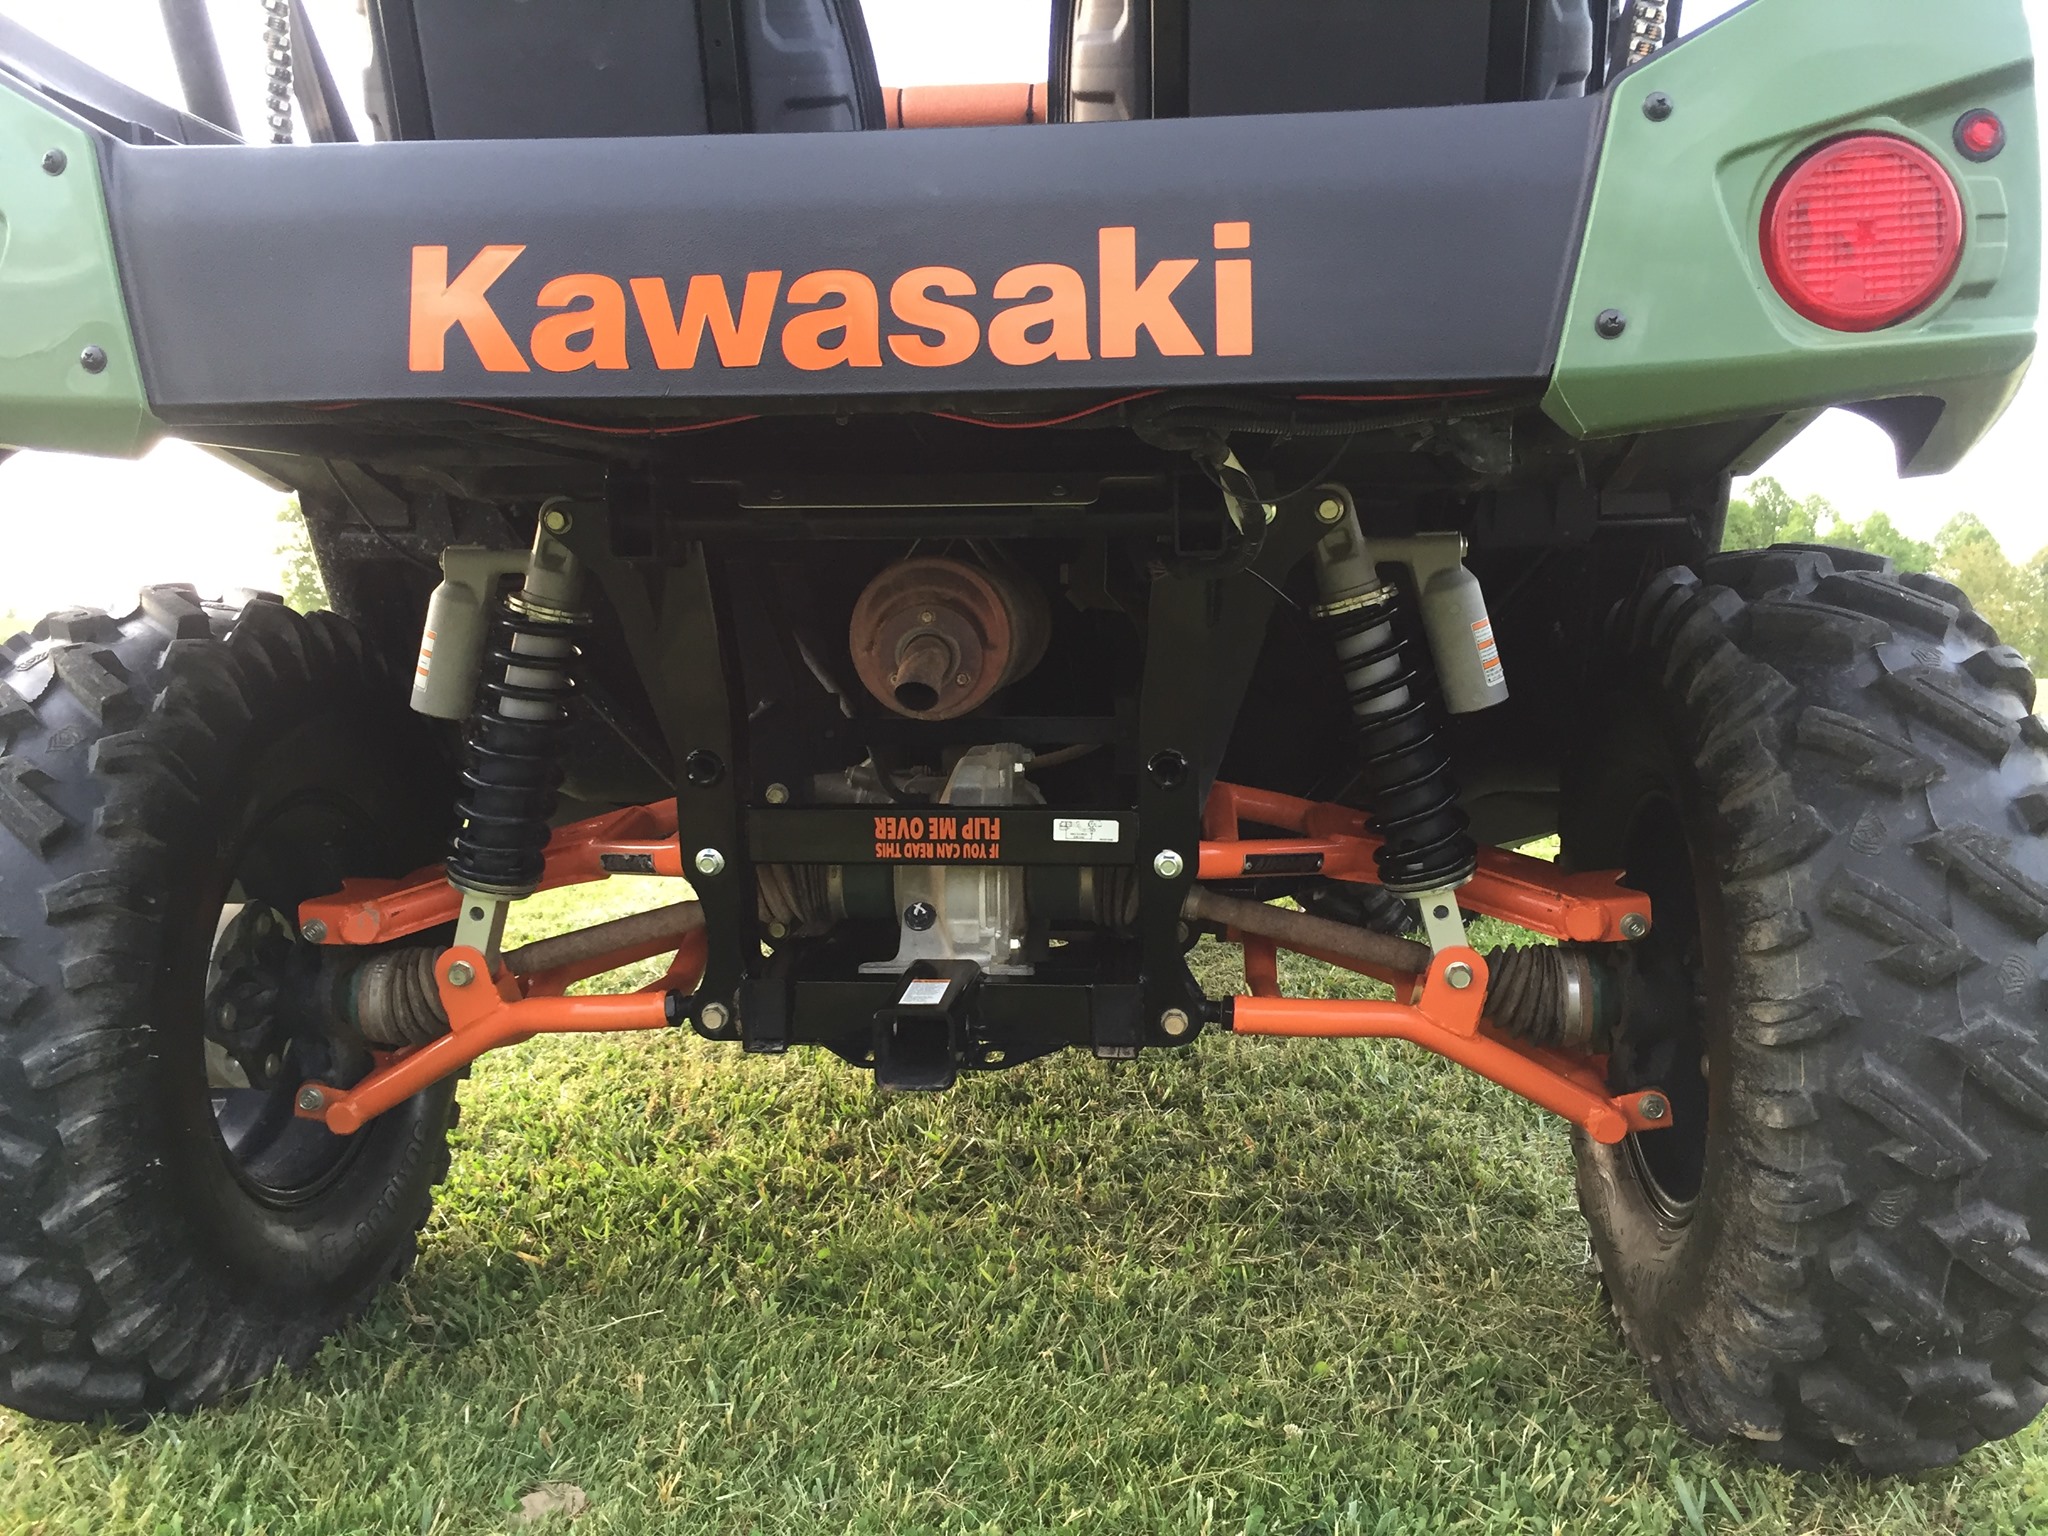 Aftermarket Springs, Suspension Upgrades, And Shock Kits For Kawasaki Side-By-Sides